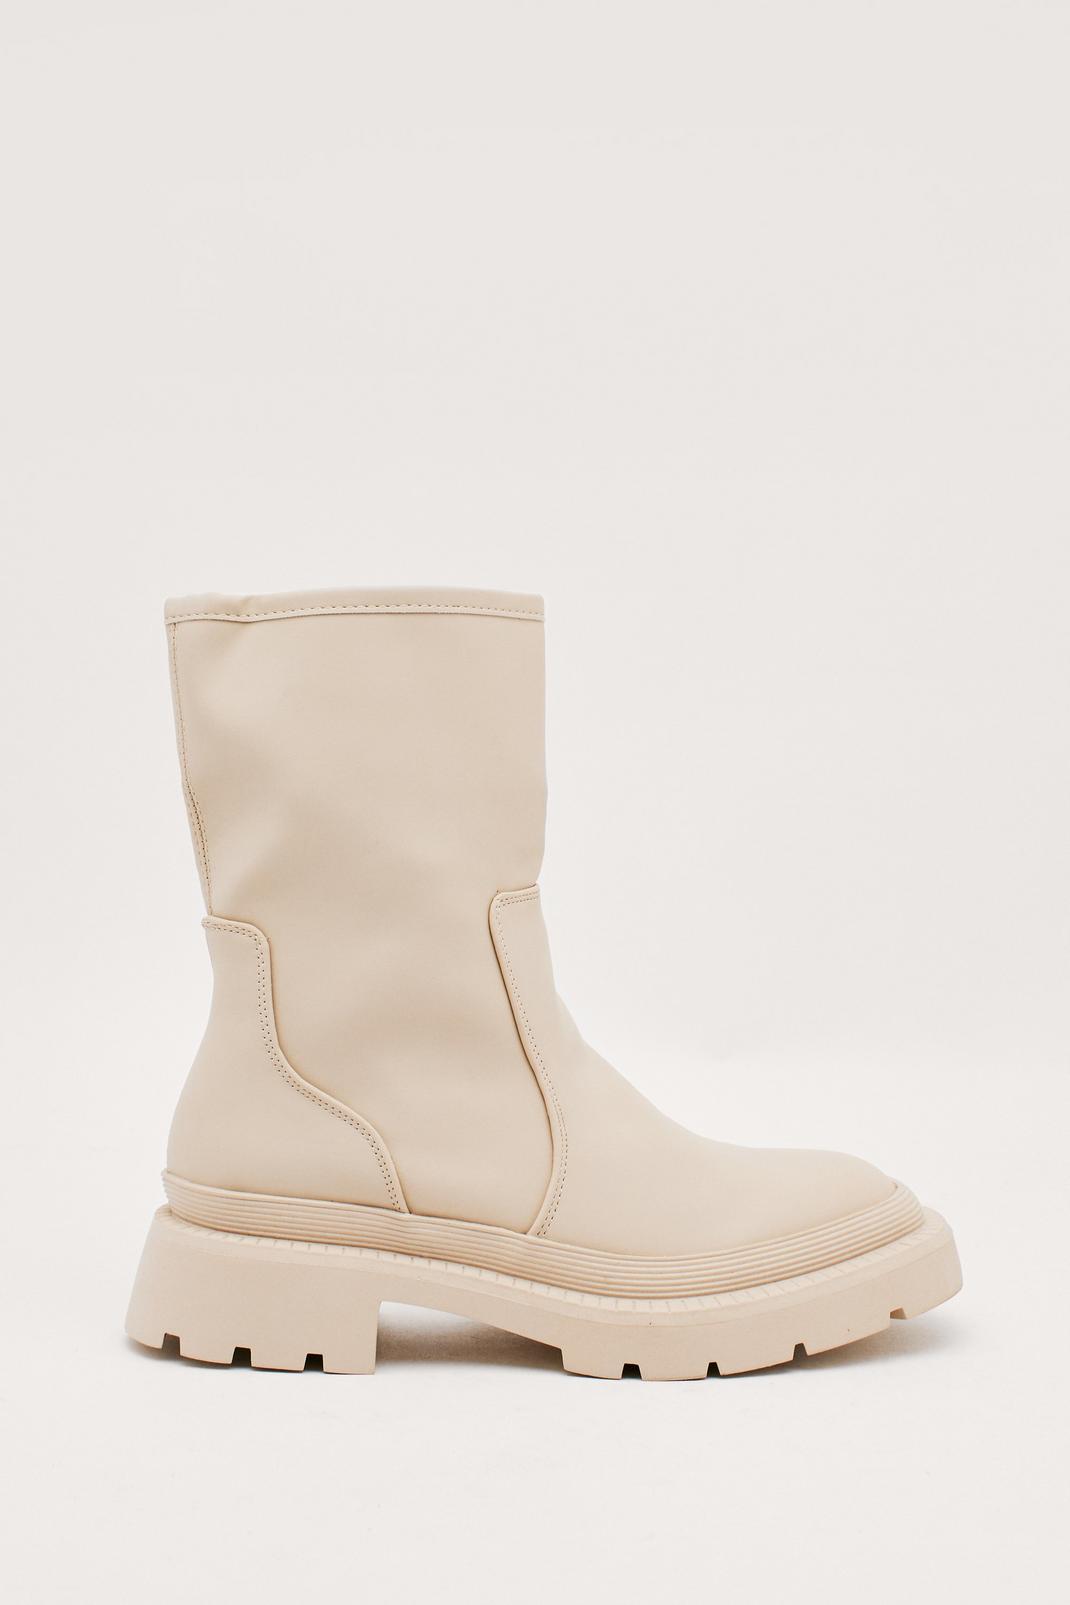 Beige Cleated Low Heel Ankle Wellie Boots image number 1